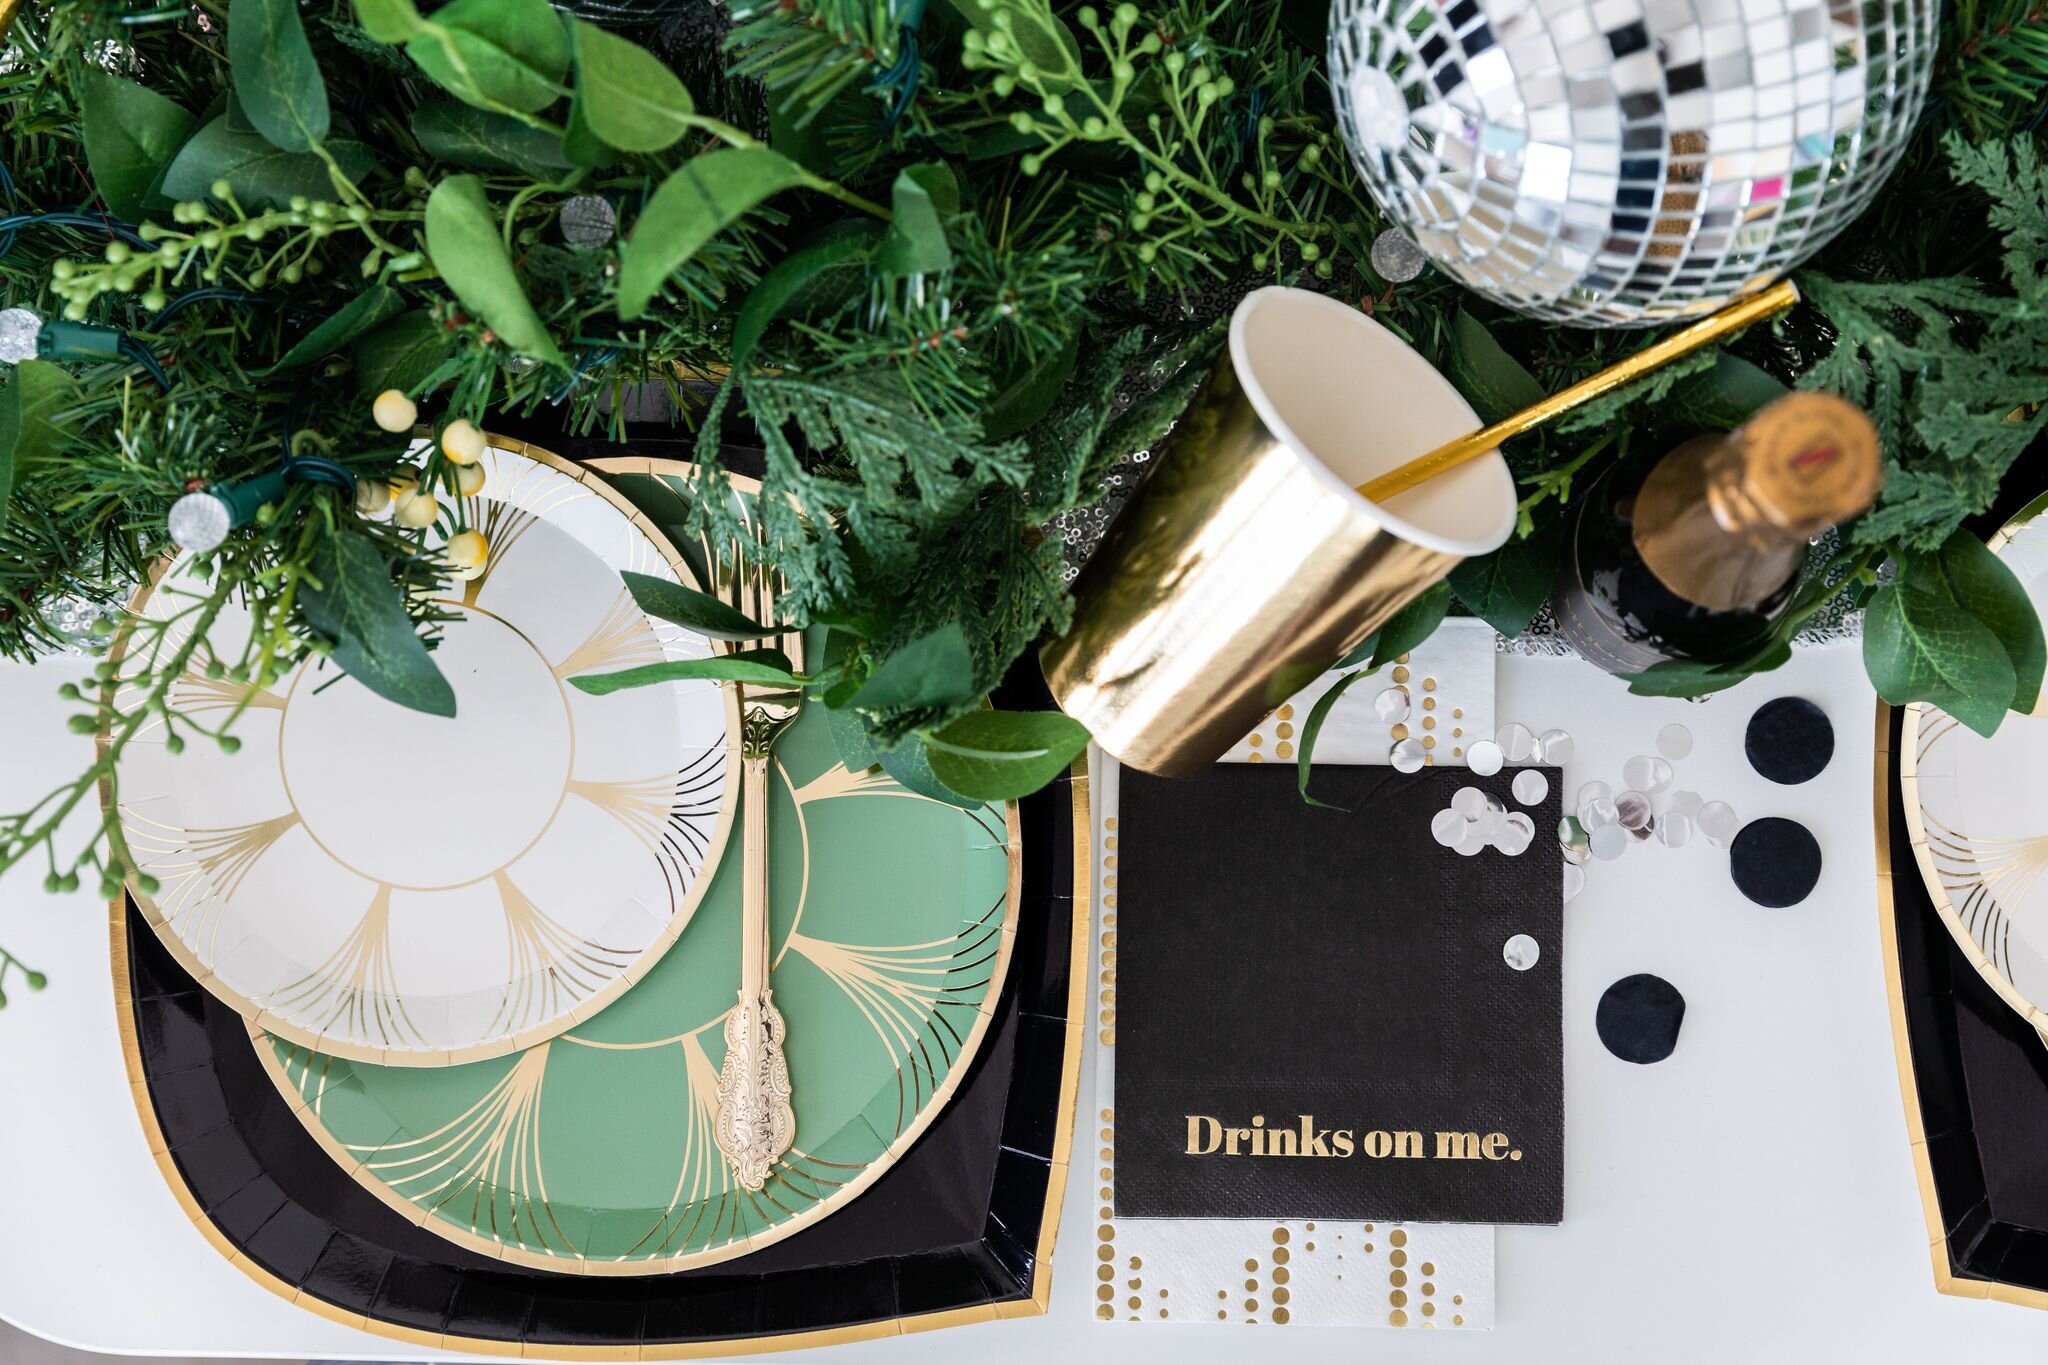 Mixed metallic NYE party inspiration - Place Settings - Get more New Year’s Eve decor ideas now at minteventdesign.com!